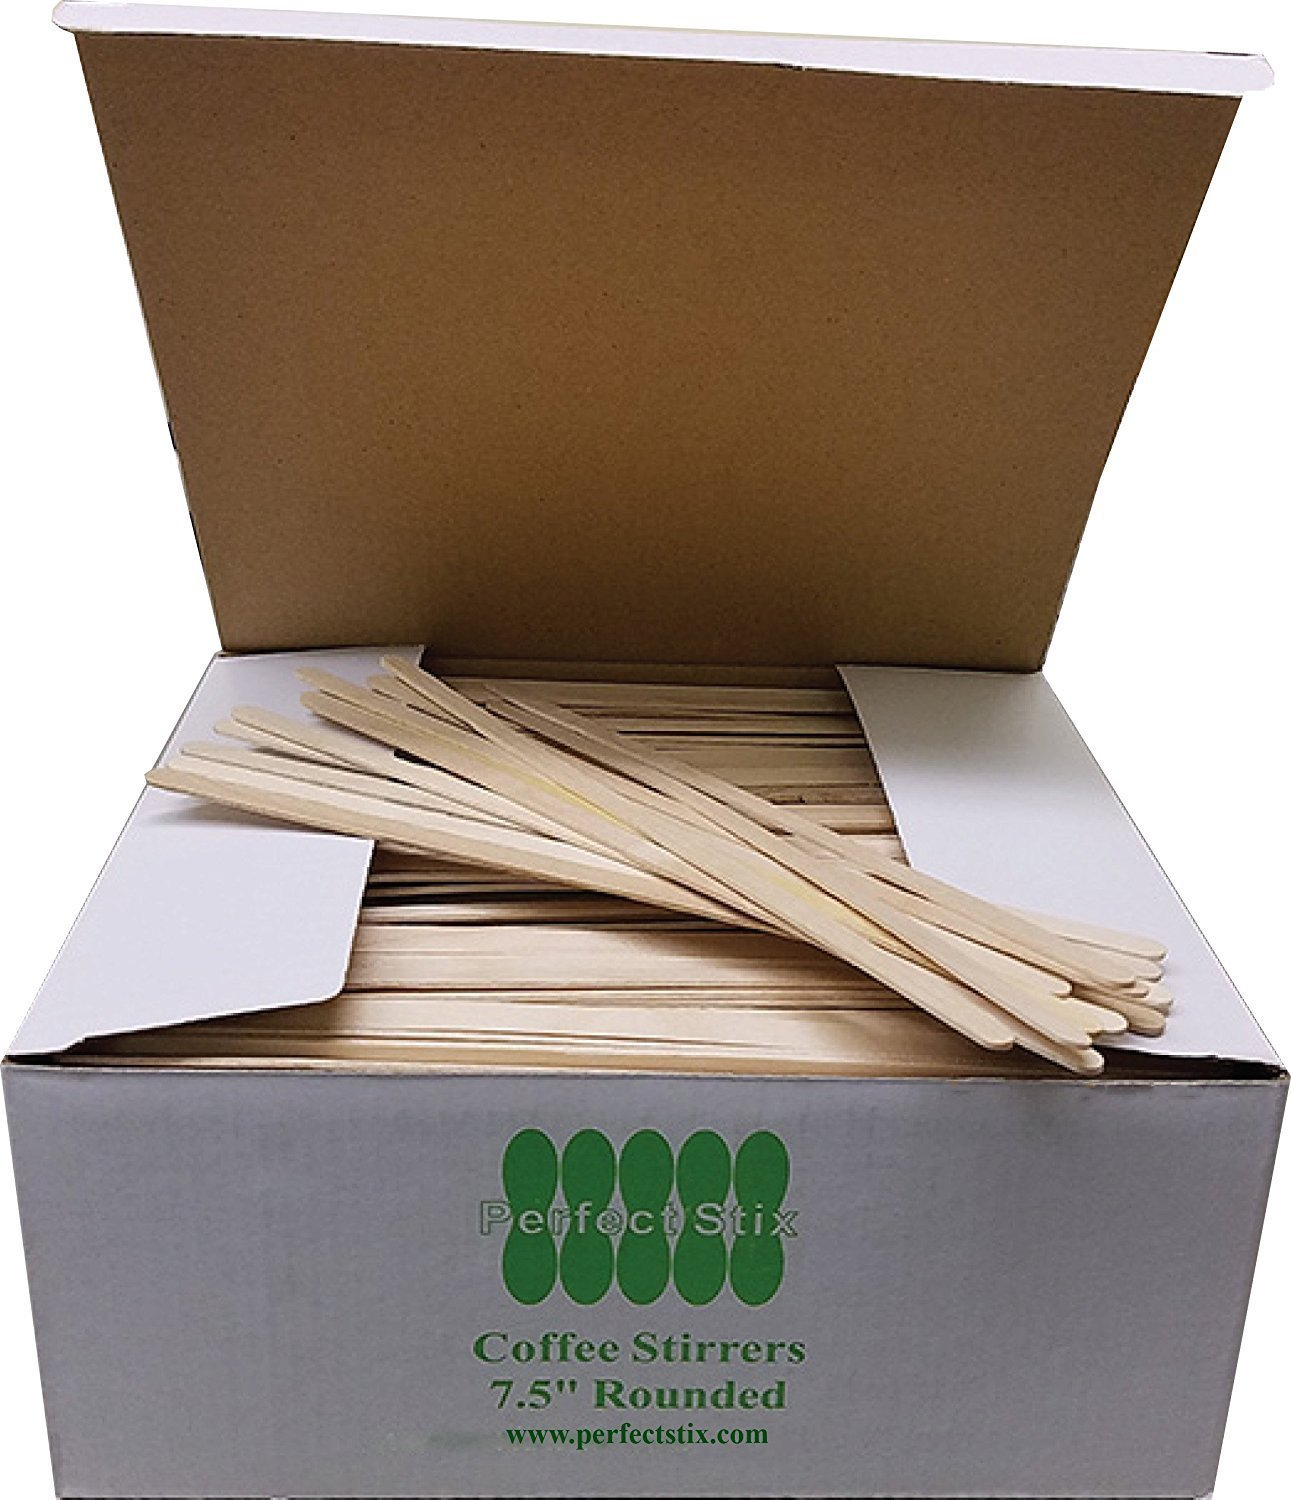 7 1/2" Coffee Stirrers With Round Ends Box of 1,000ct (Item# FS204)